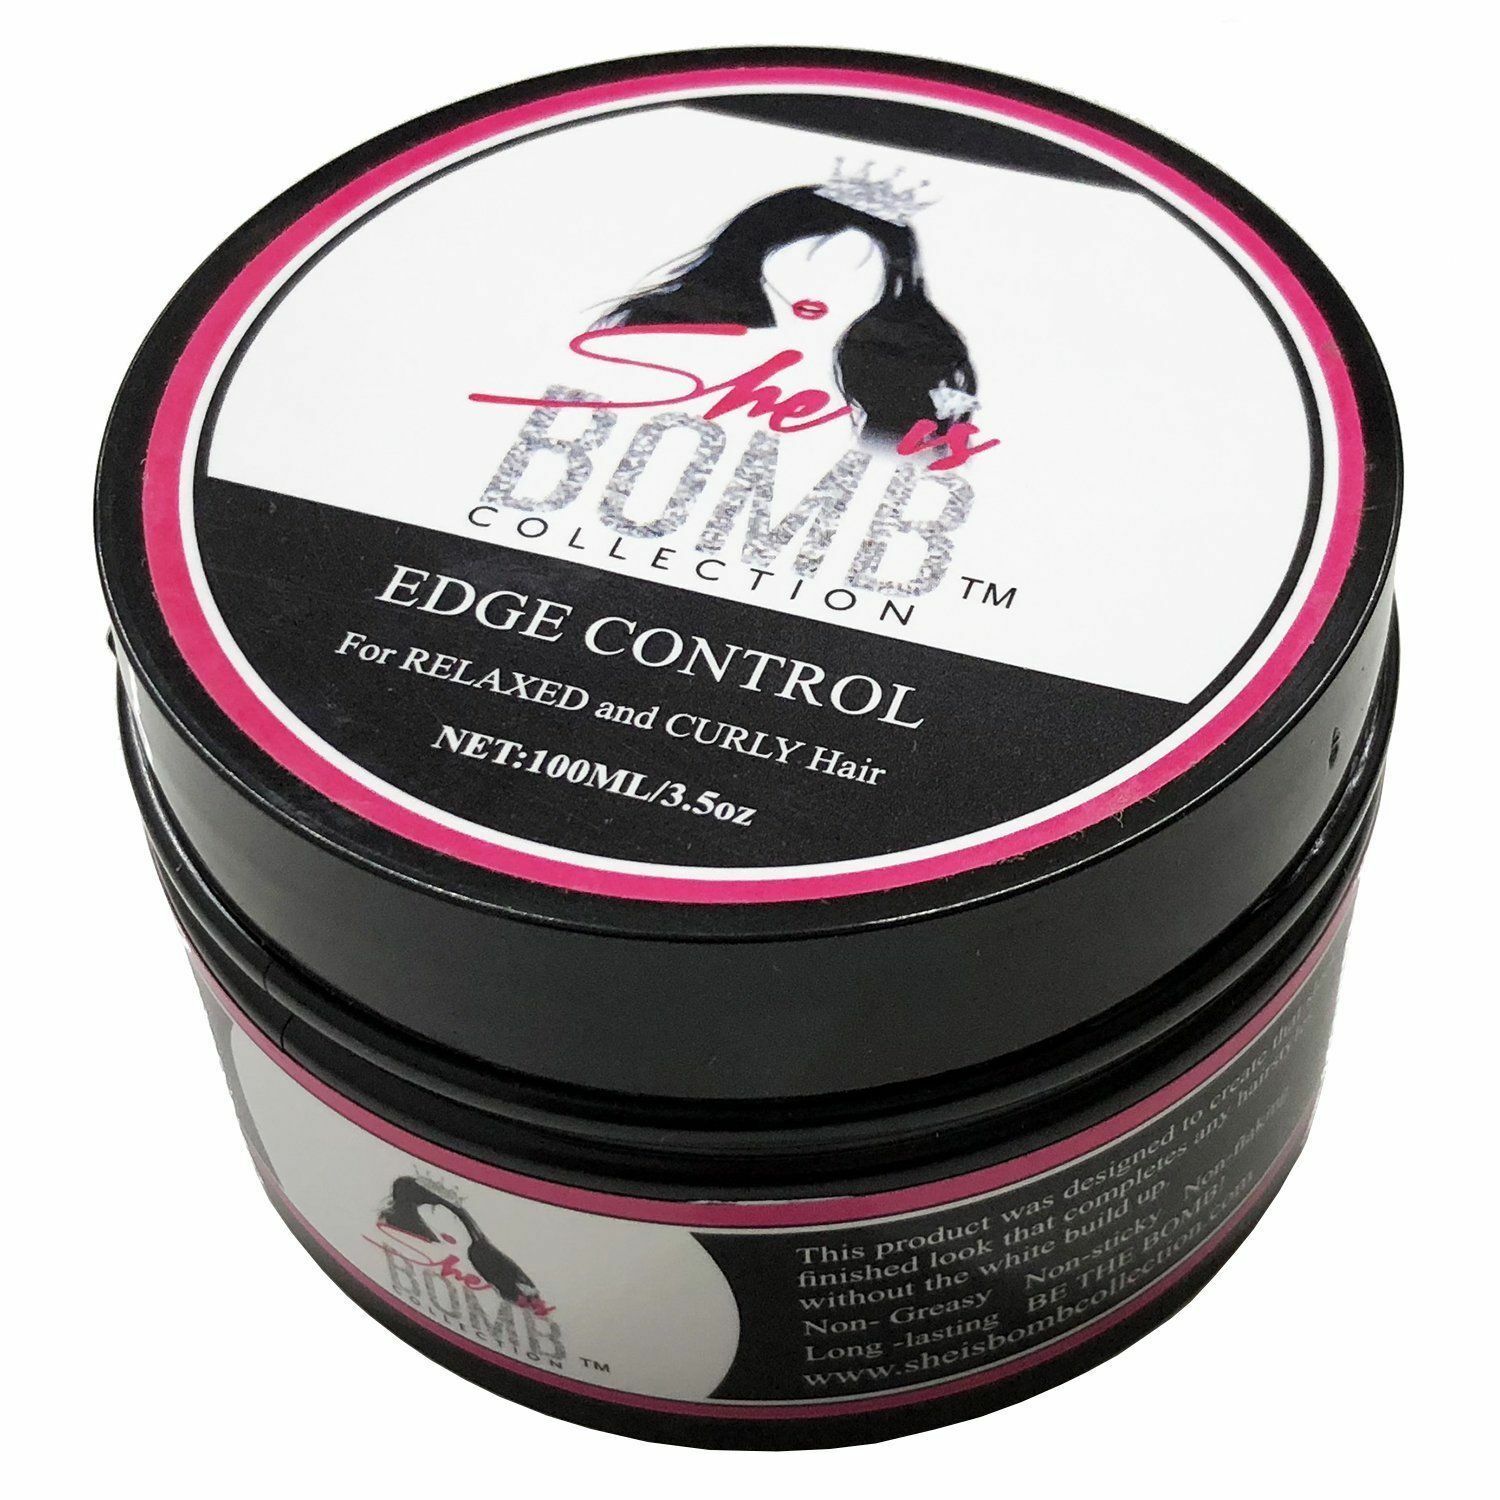 She Is Bomb Collection Edge Control 3.5 Oz. - Free Shipping !!!